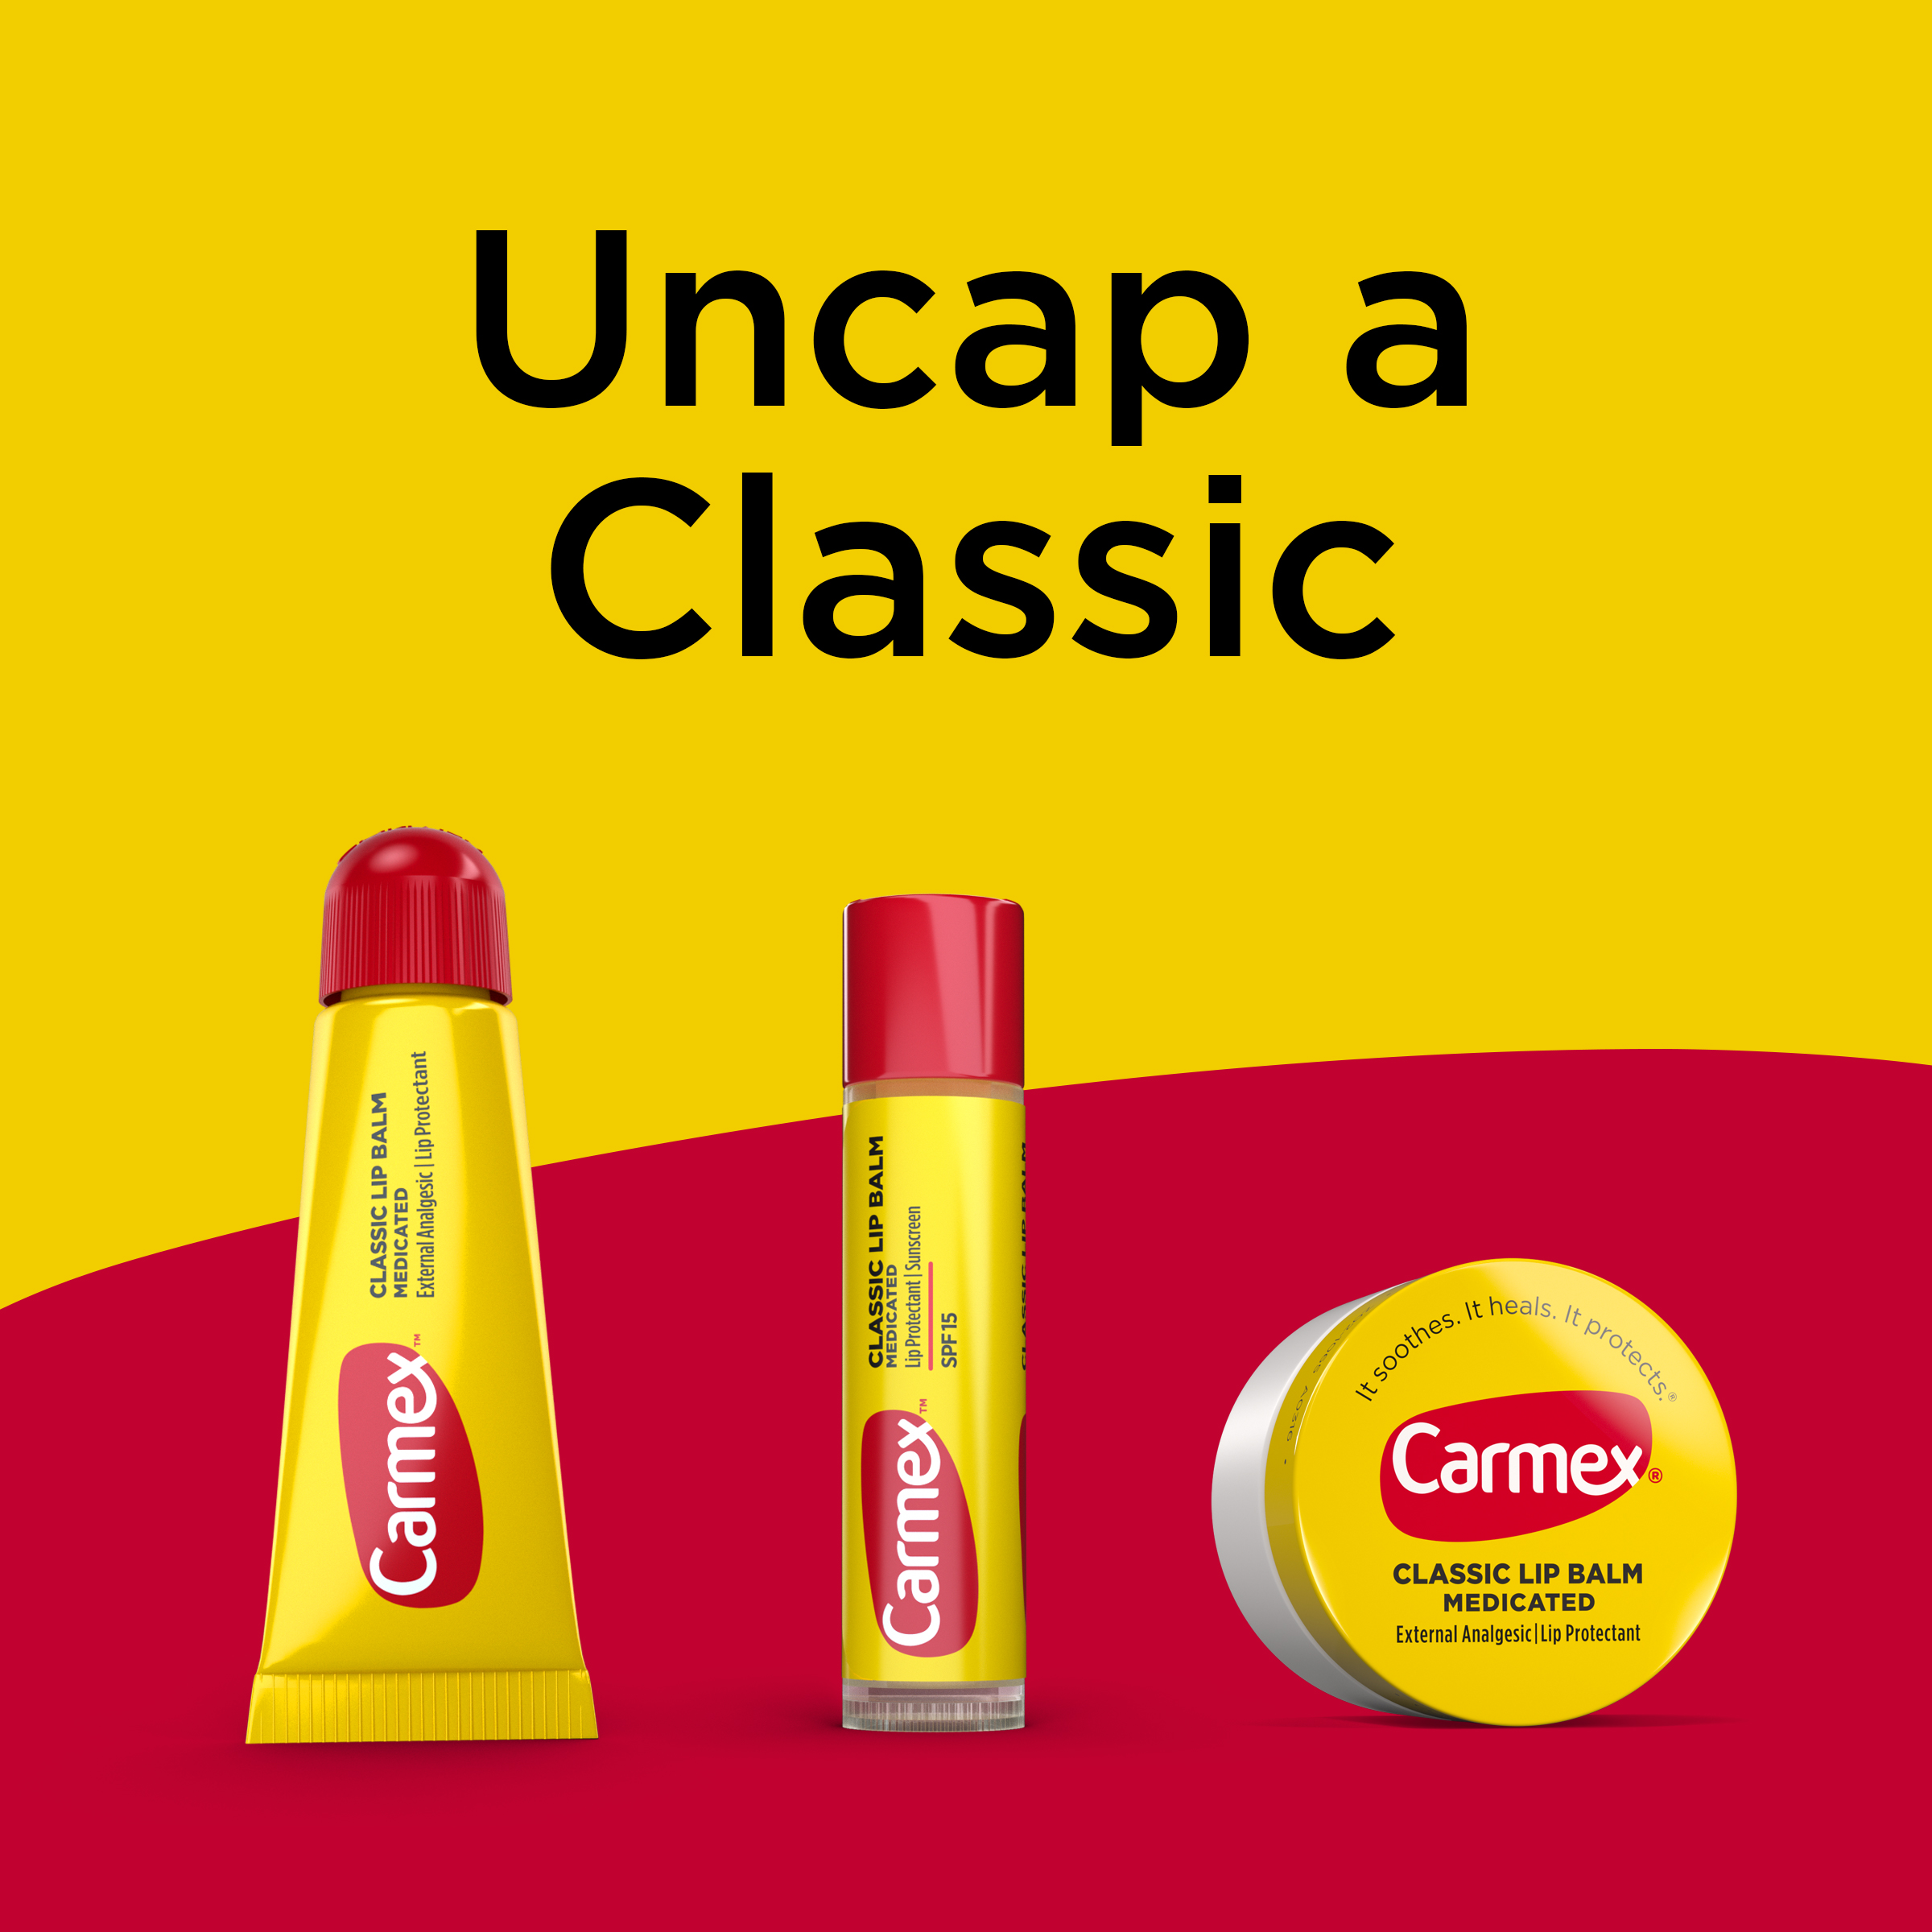 Carmex Classic Medicated Lip Balm Sticks, Lip Moisturizer, SPF 15, 3 Count (1 Pack of 3) - image 8 of 11